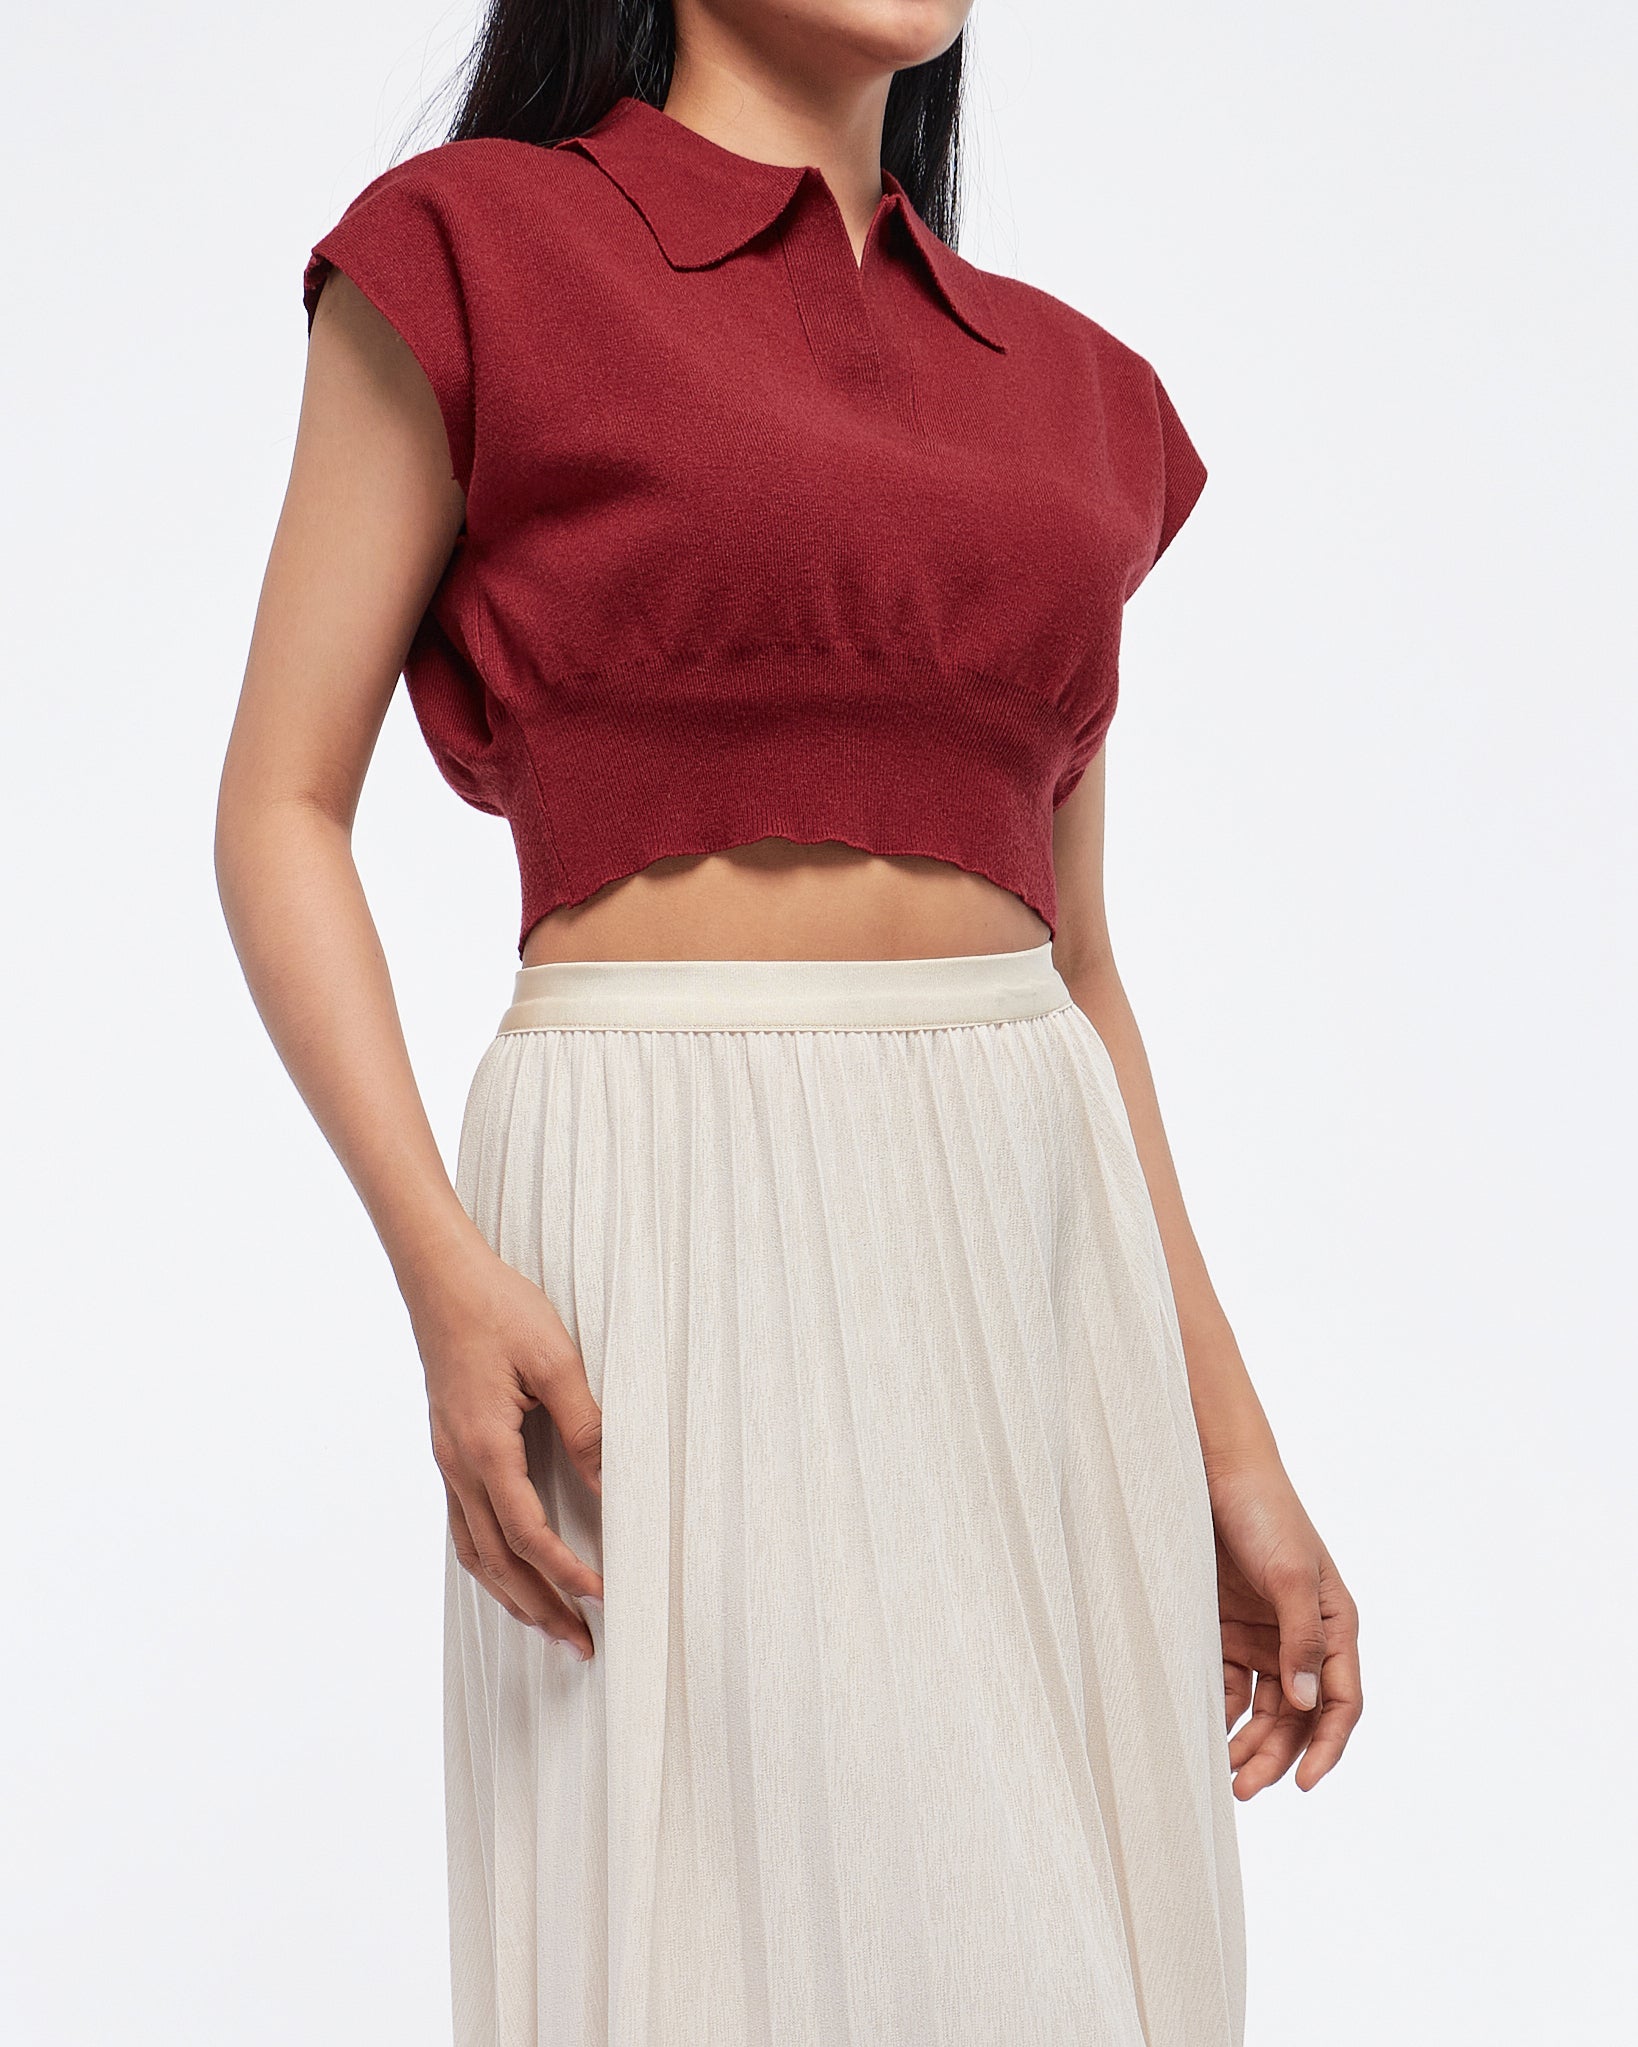 MOI OUTFIT-Soft Knit Polo Lady Crop Top 14.90